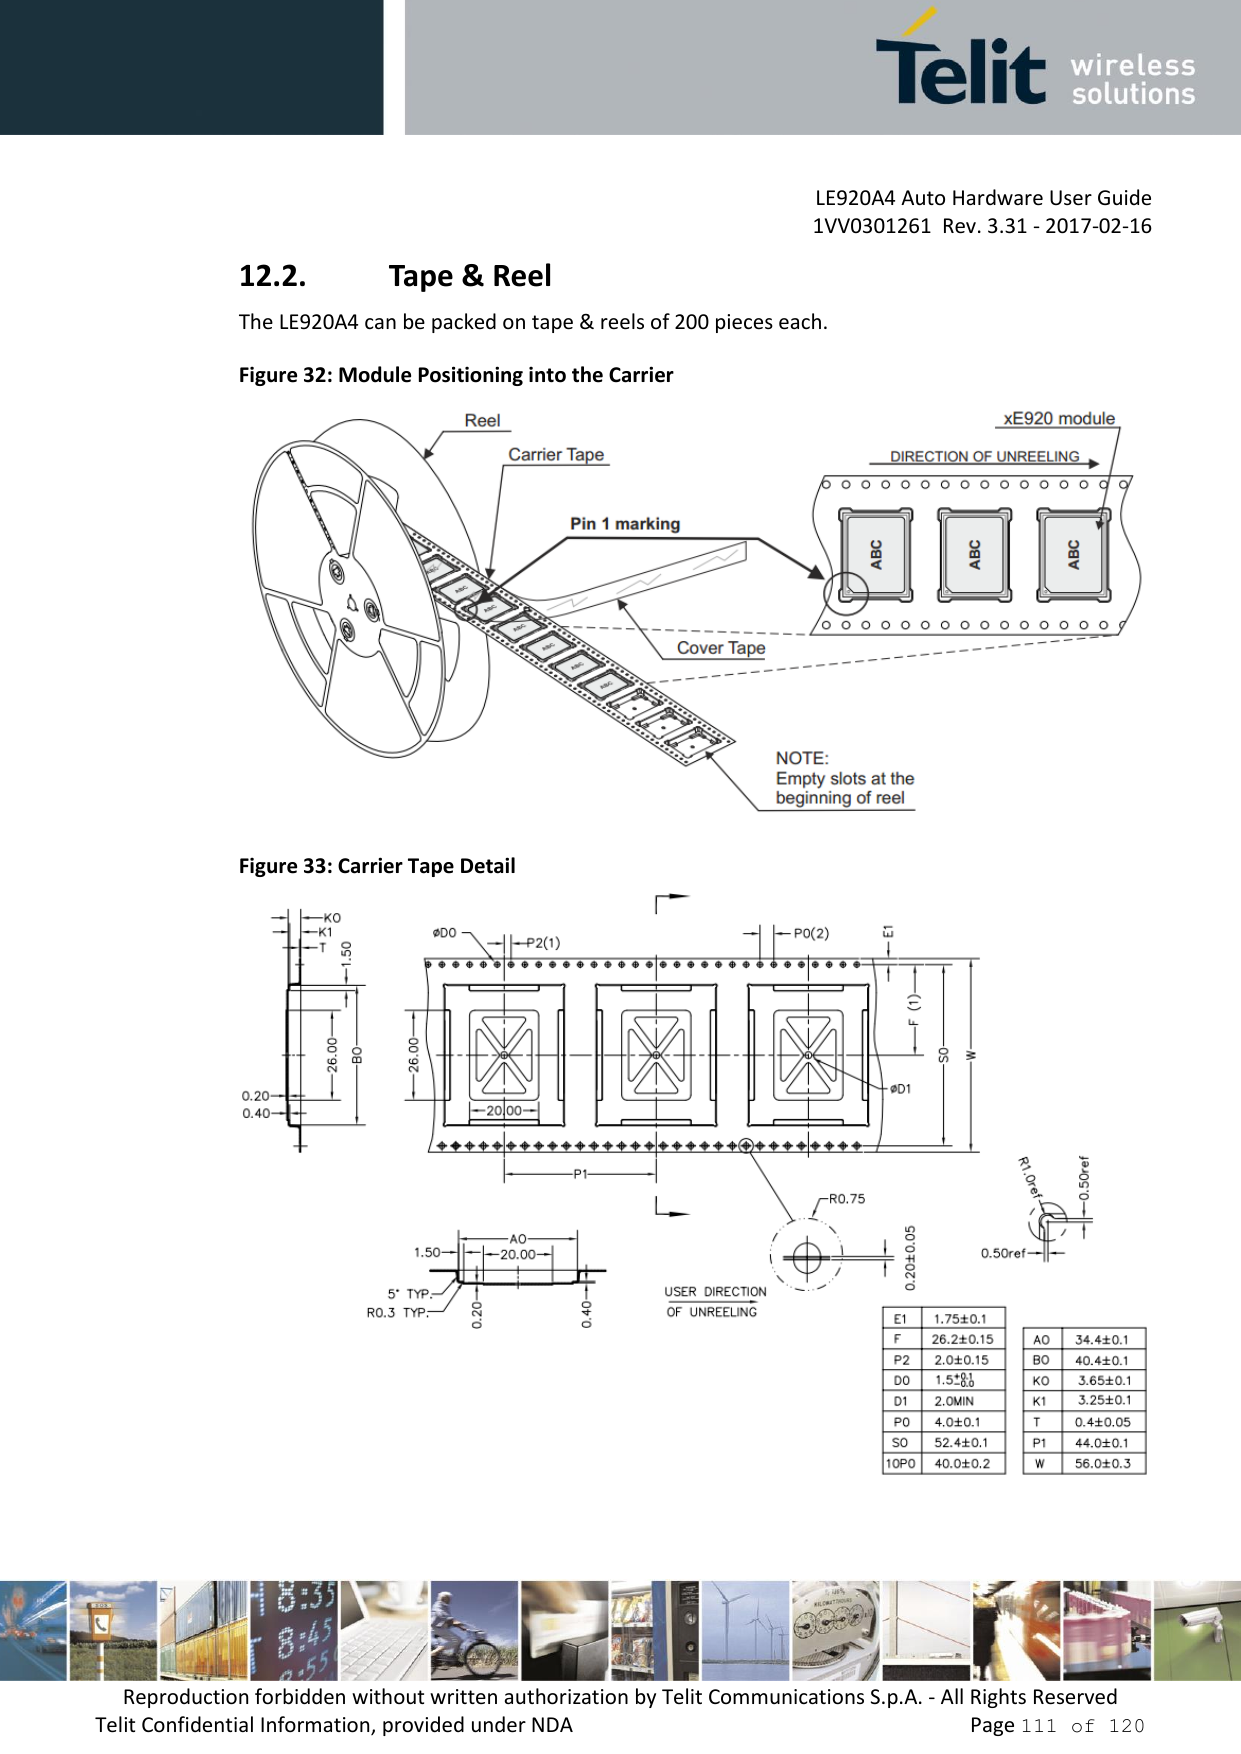 LE920A4 Auto Hardware User Guide 1VV0301261  Rev. 3.31 - 2017-02-16 Reproduction forbidden without written authorization by Telit Communications S.p.A. - All Rights Reserved Telit Confidential Information, provided under NDA   Page 111 of 120 12.2. Tape &amp; Reel The LE920A4 can be packed on tape &amp; reels of 200 pieces each. Figure 32: Module Positioning into the Carrier Figure 33: Carrier Tape Detail 